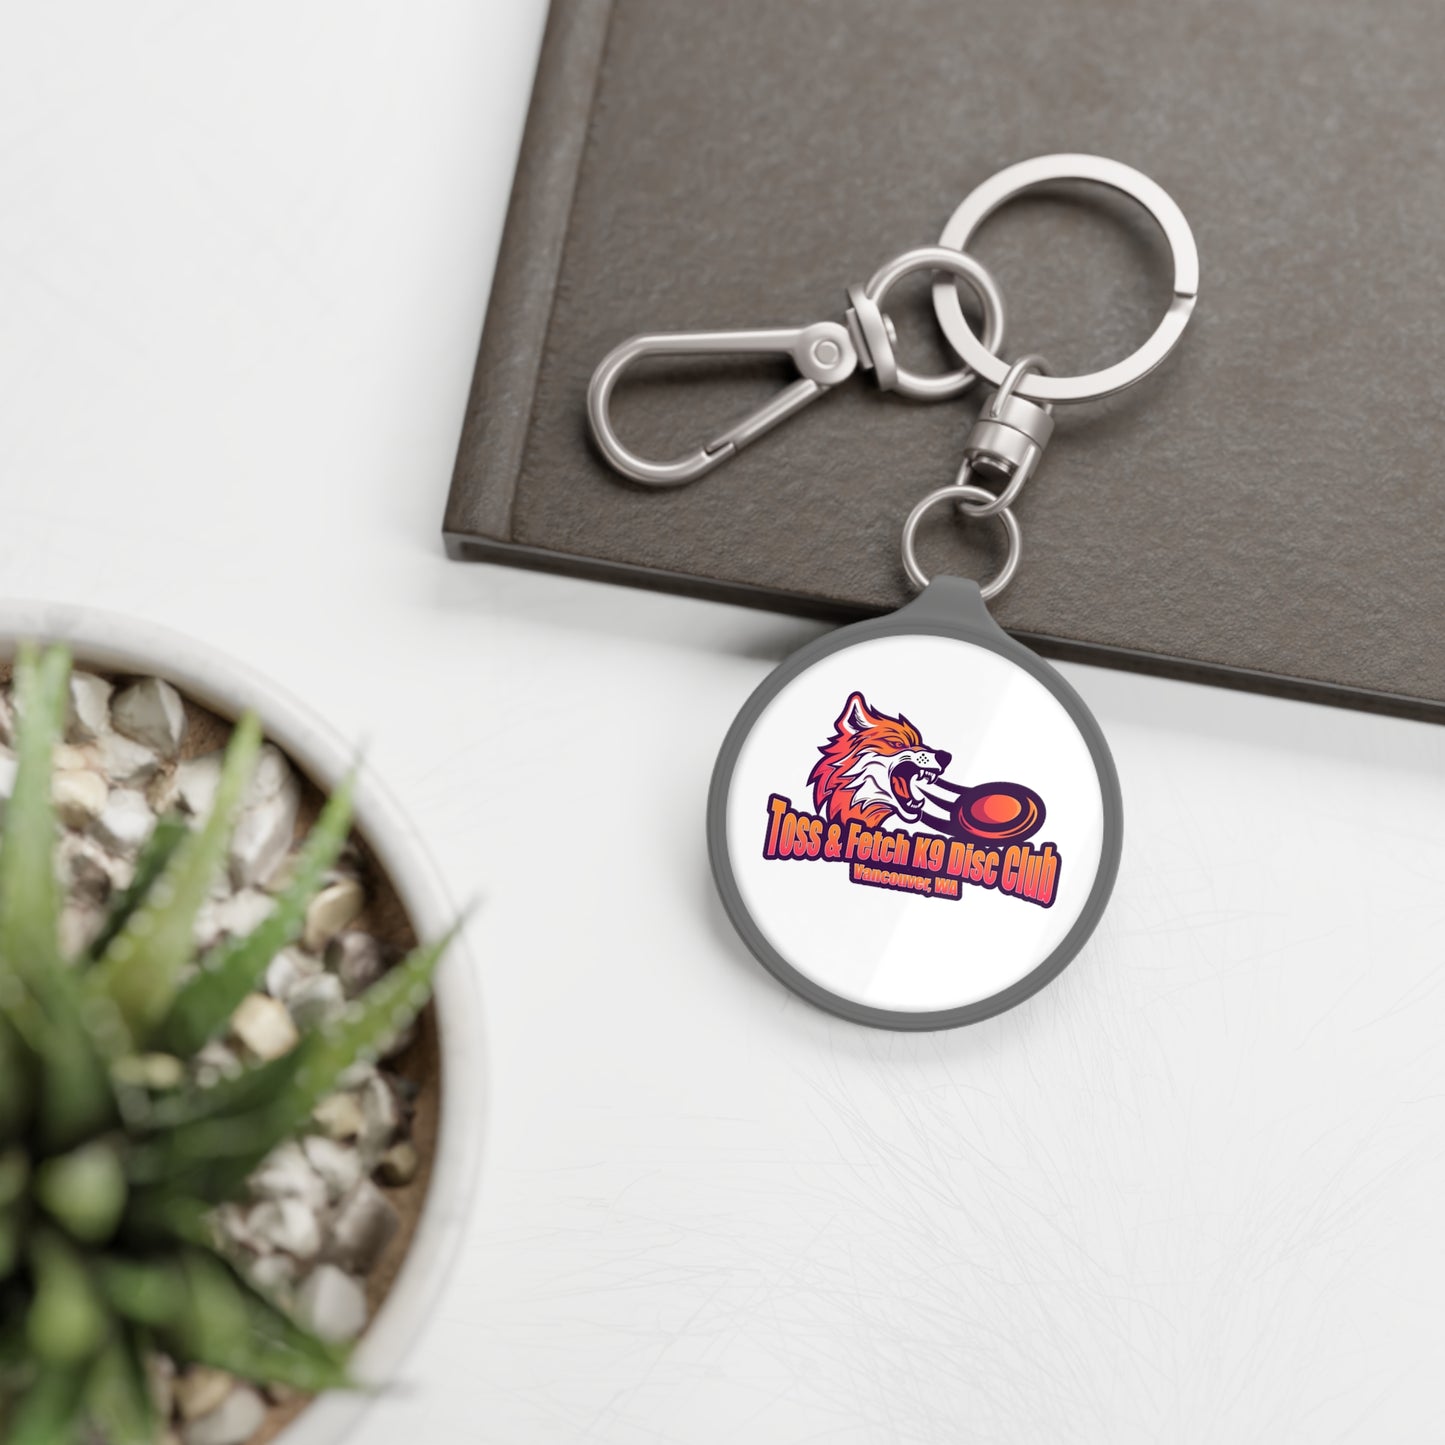 Toss & Fetch - Vancouver, WA Keyring Tag